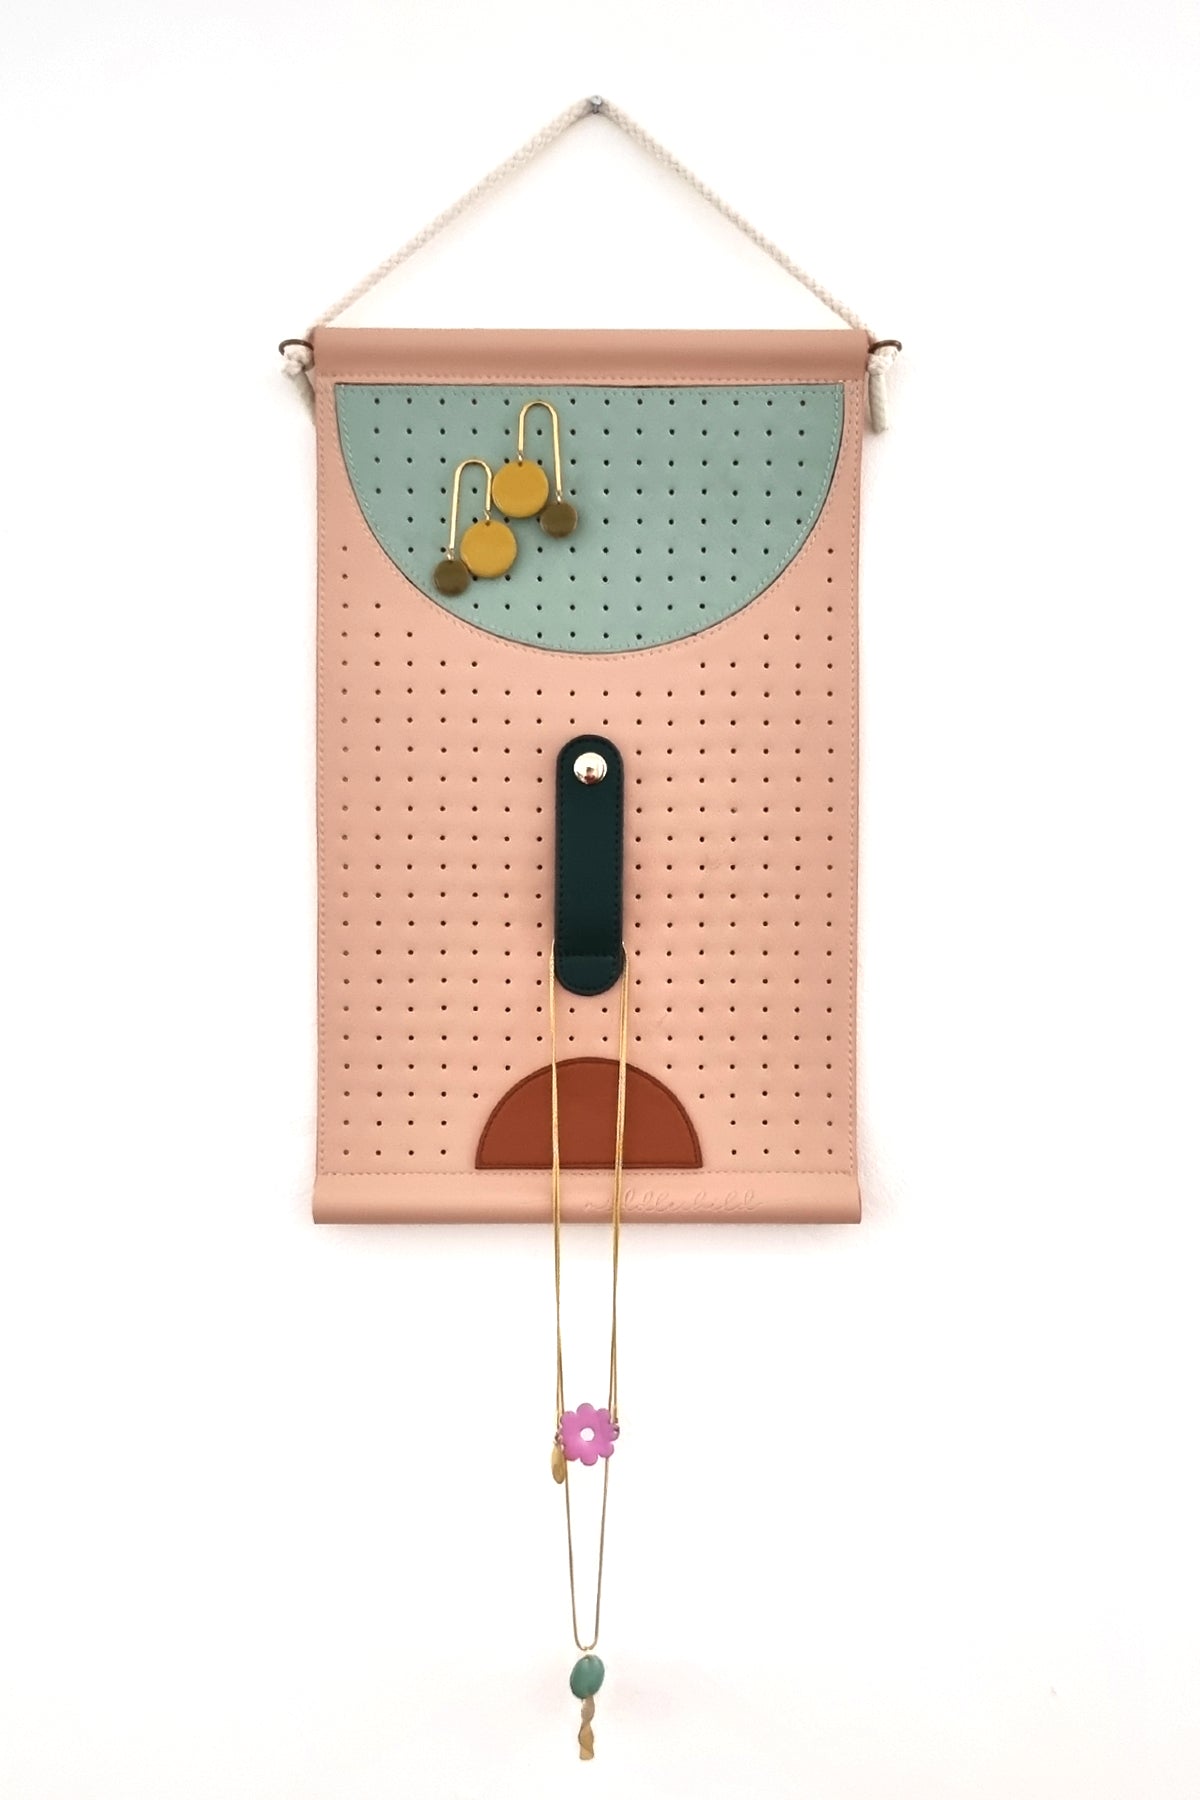 A peach perforated wall hanging is hung by a rope against a white wall. The wall hanging features a large perforated sage half circle at the top from which a pair of chartreuse earrings hang. Below this is a forest green elongated oval stitched to the middle with a gold button clasp, from this a couple of necklaces are fastened. Below this is a tan half circle.